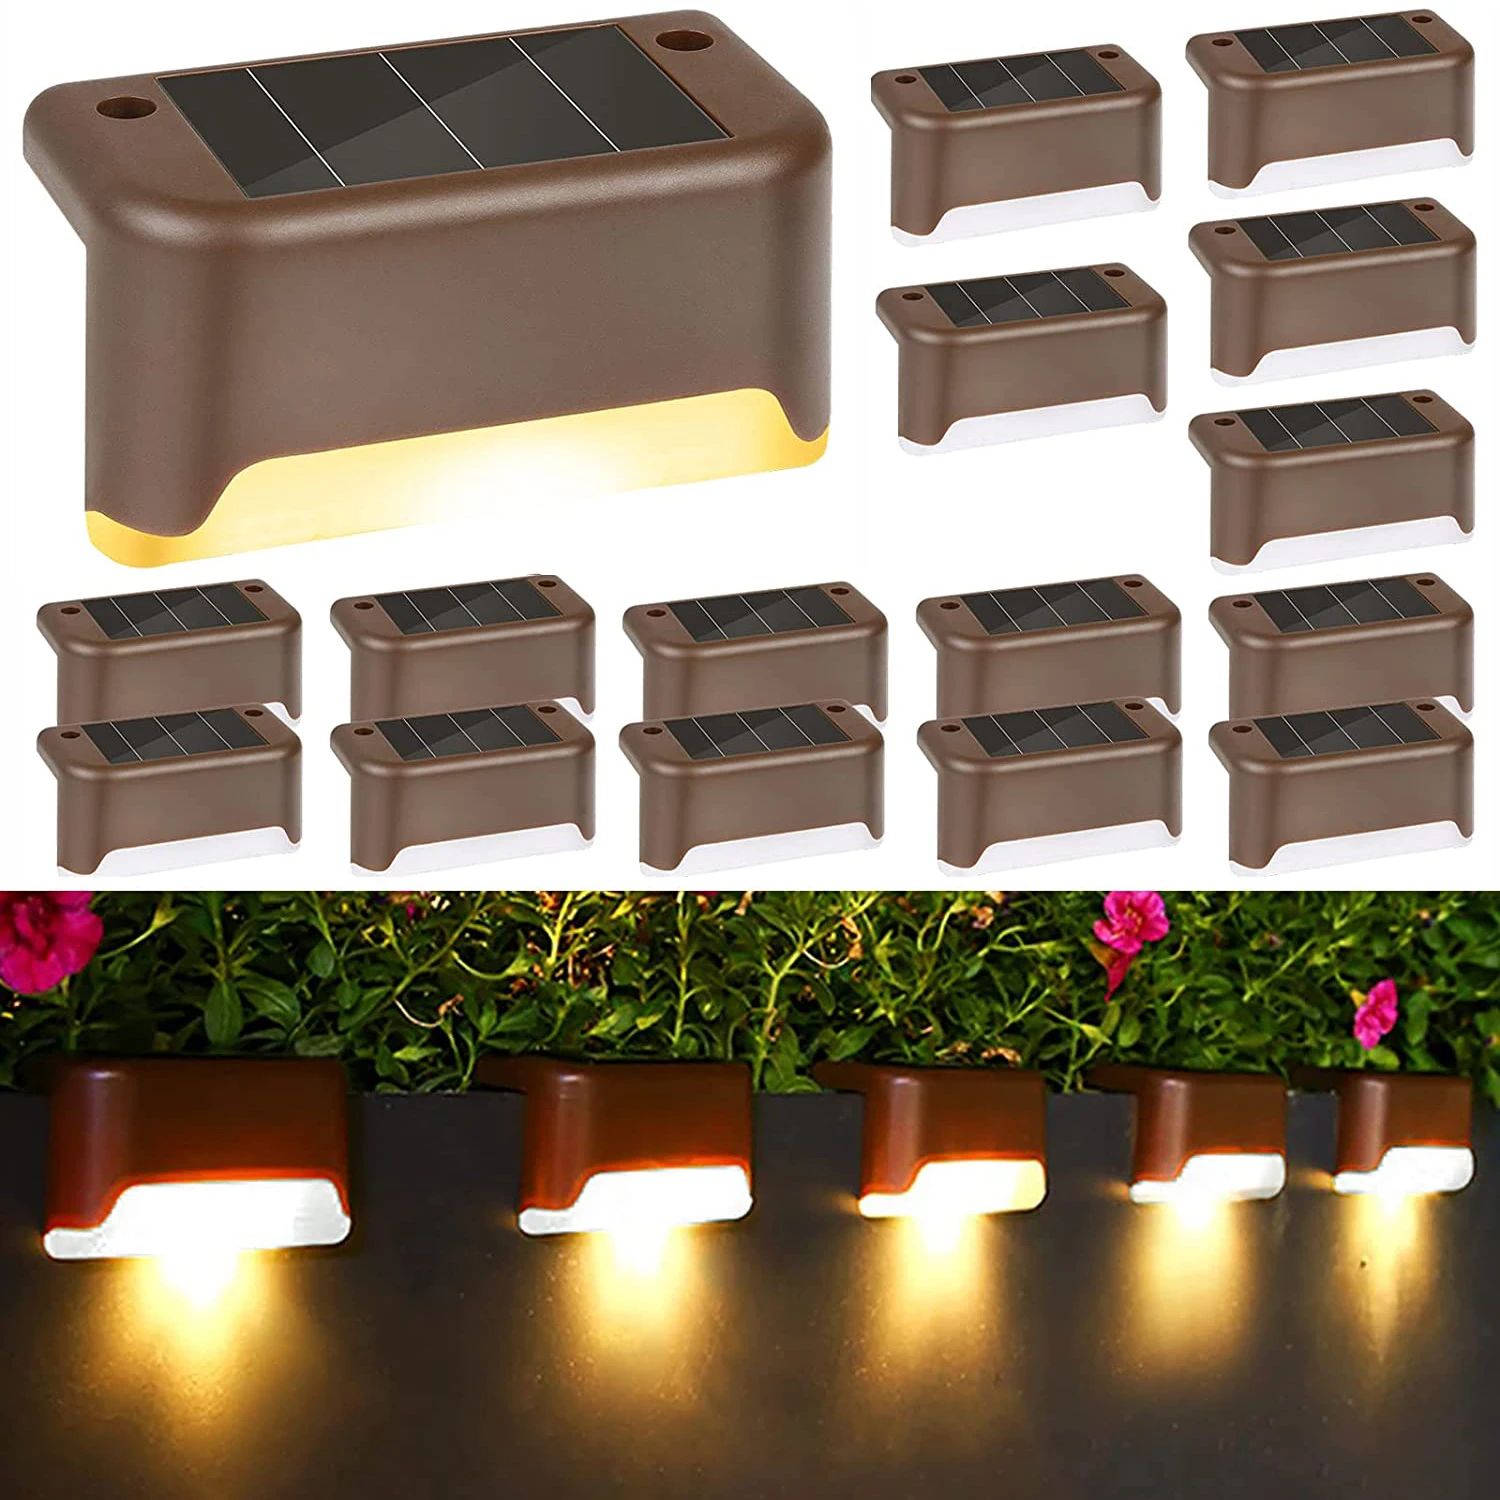 Solar Deck Lights Outdoor Step Lights LED Waterproof Solar Panel Fence Lights Stair Lights for Patio, Yard, Post and Driveway